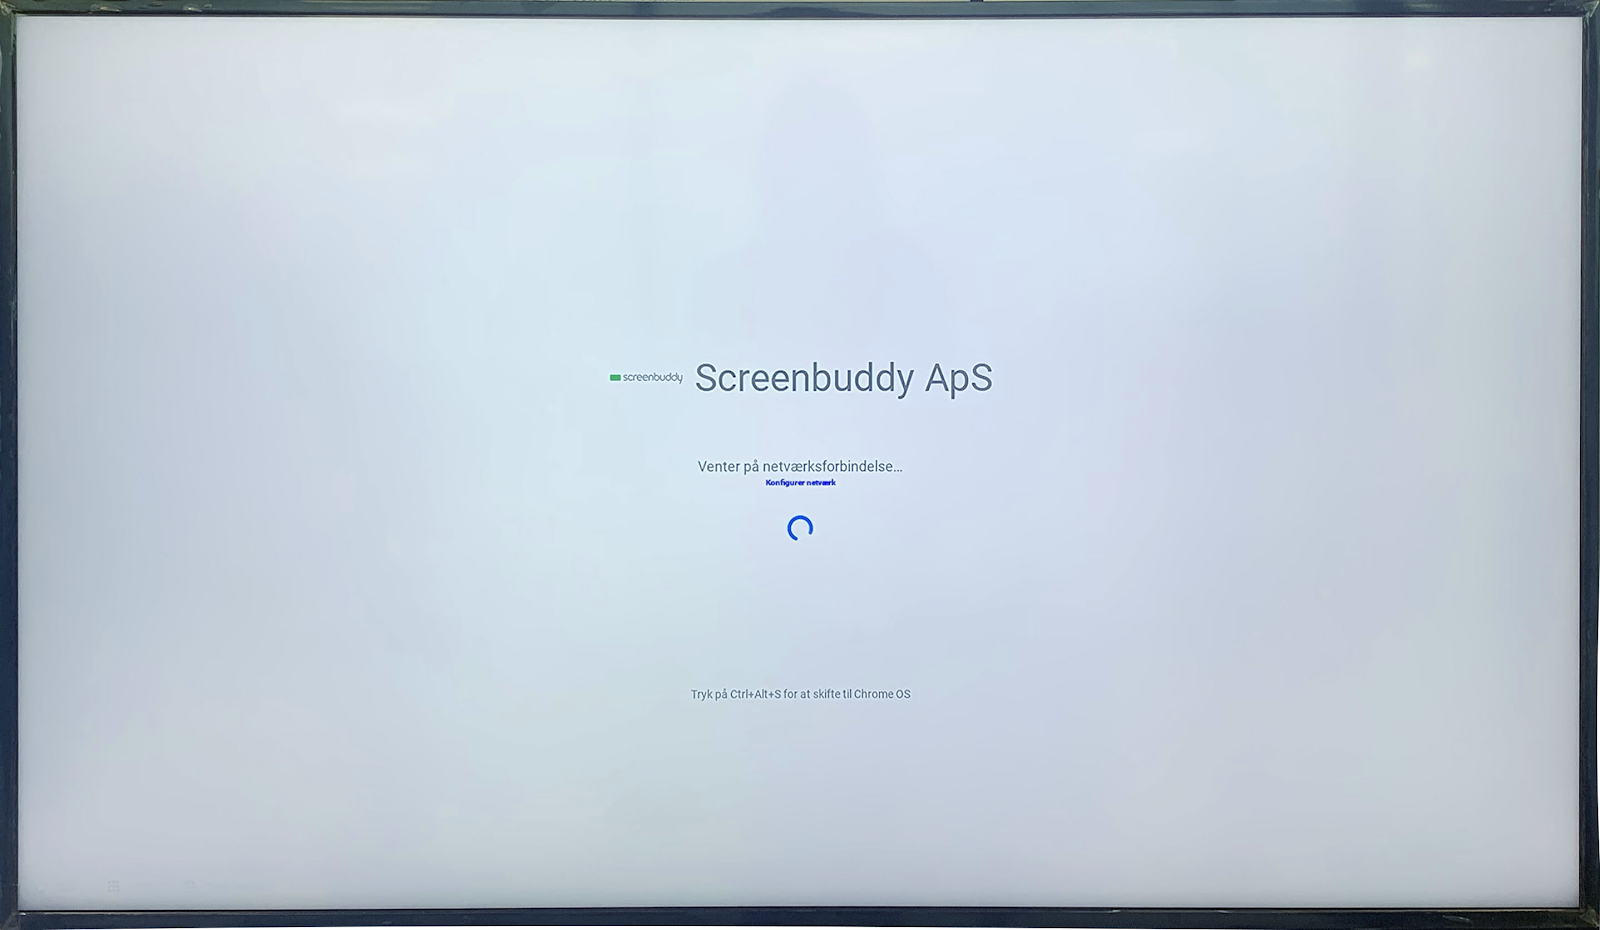 Loading screen of Screenbuddy ApS on a digital display, waiting for network connection.